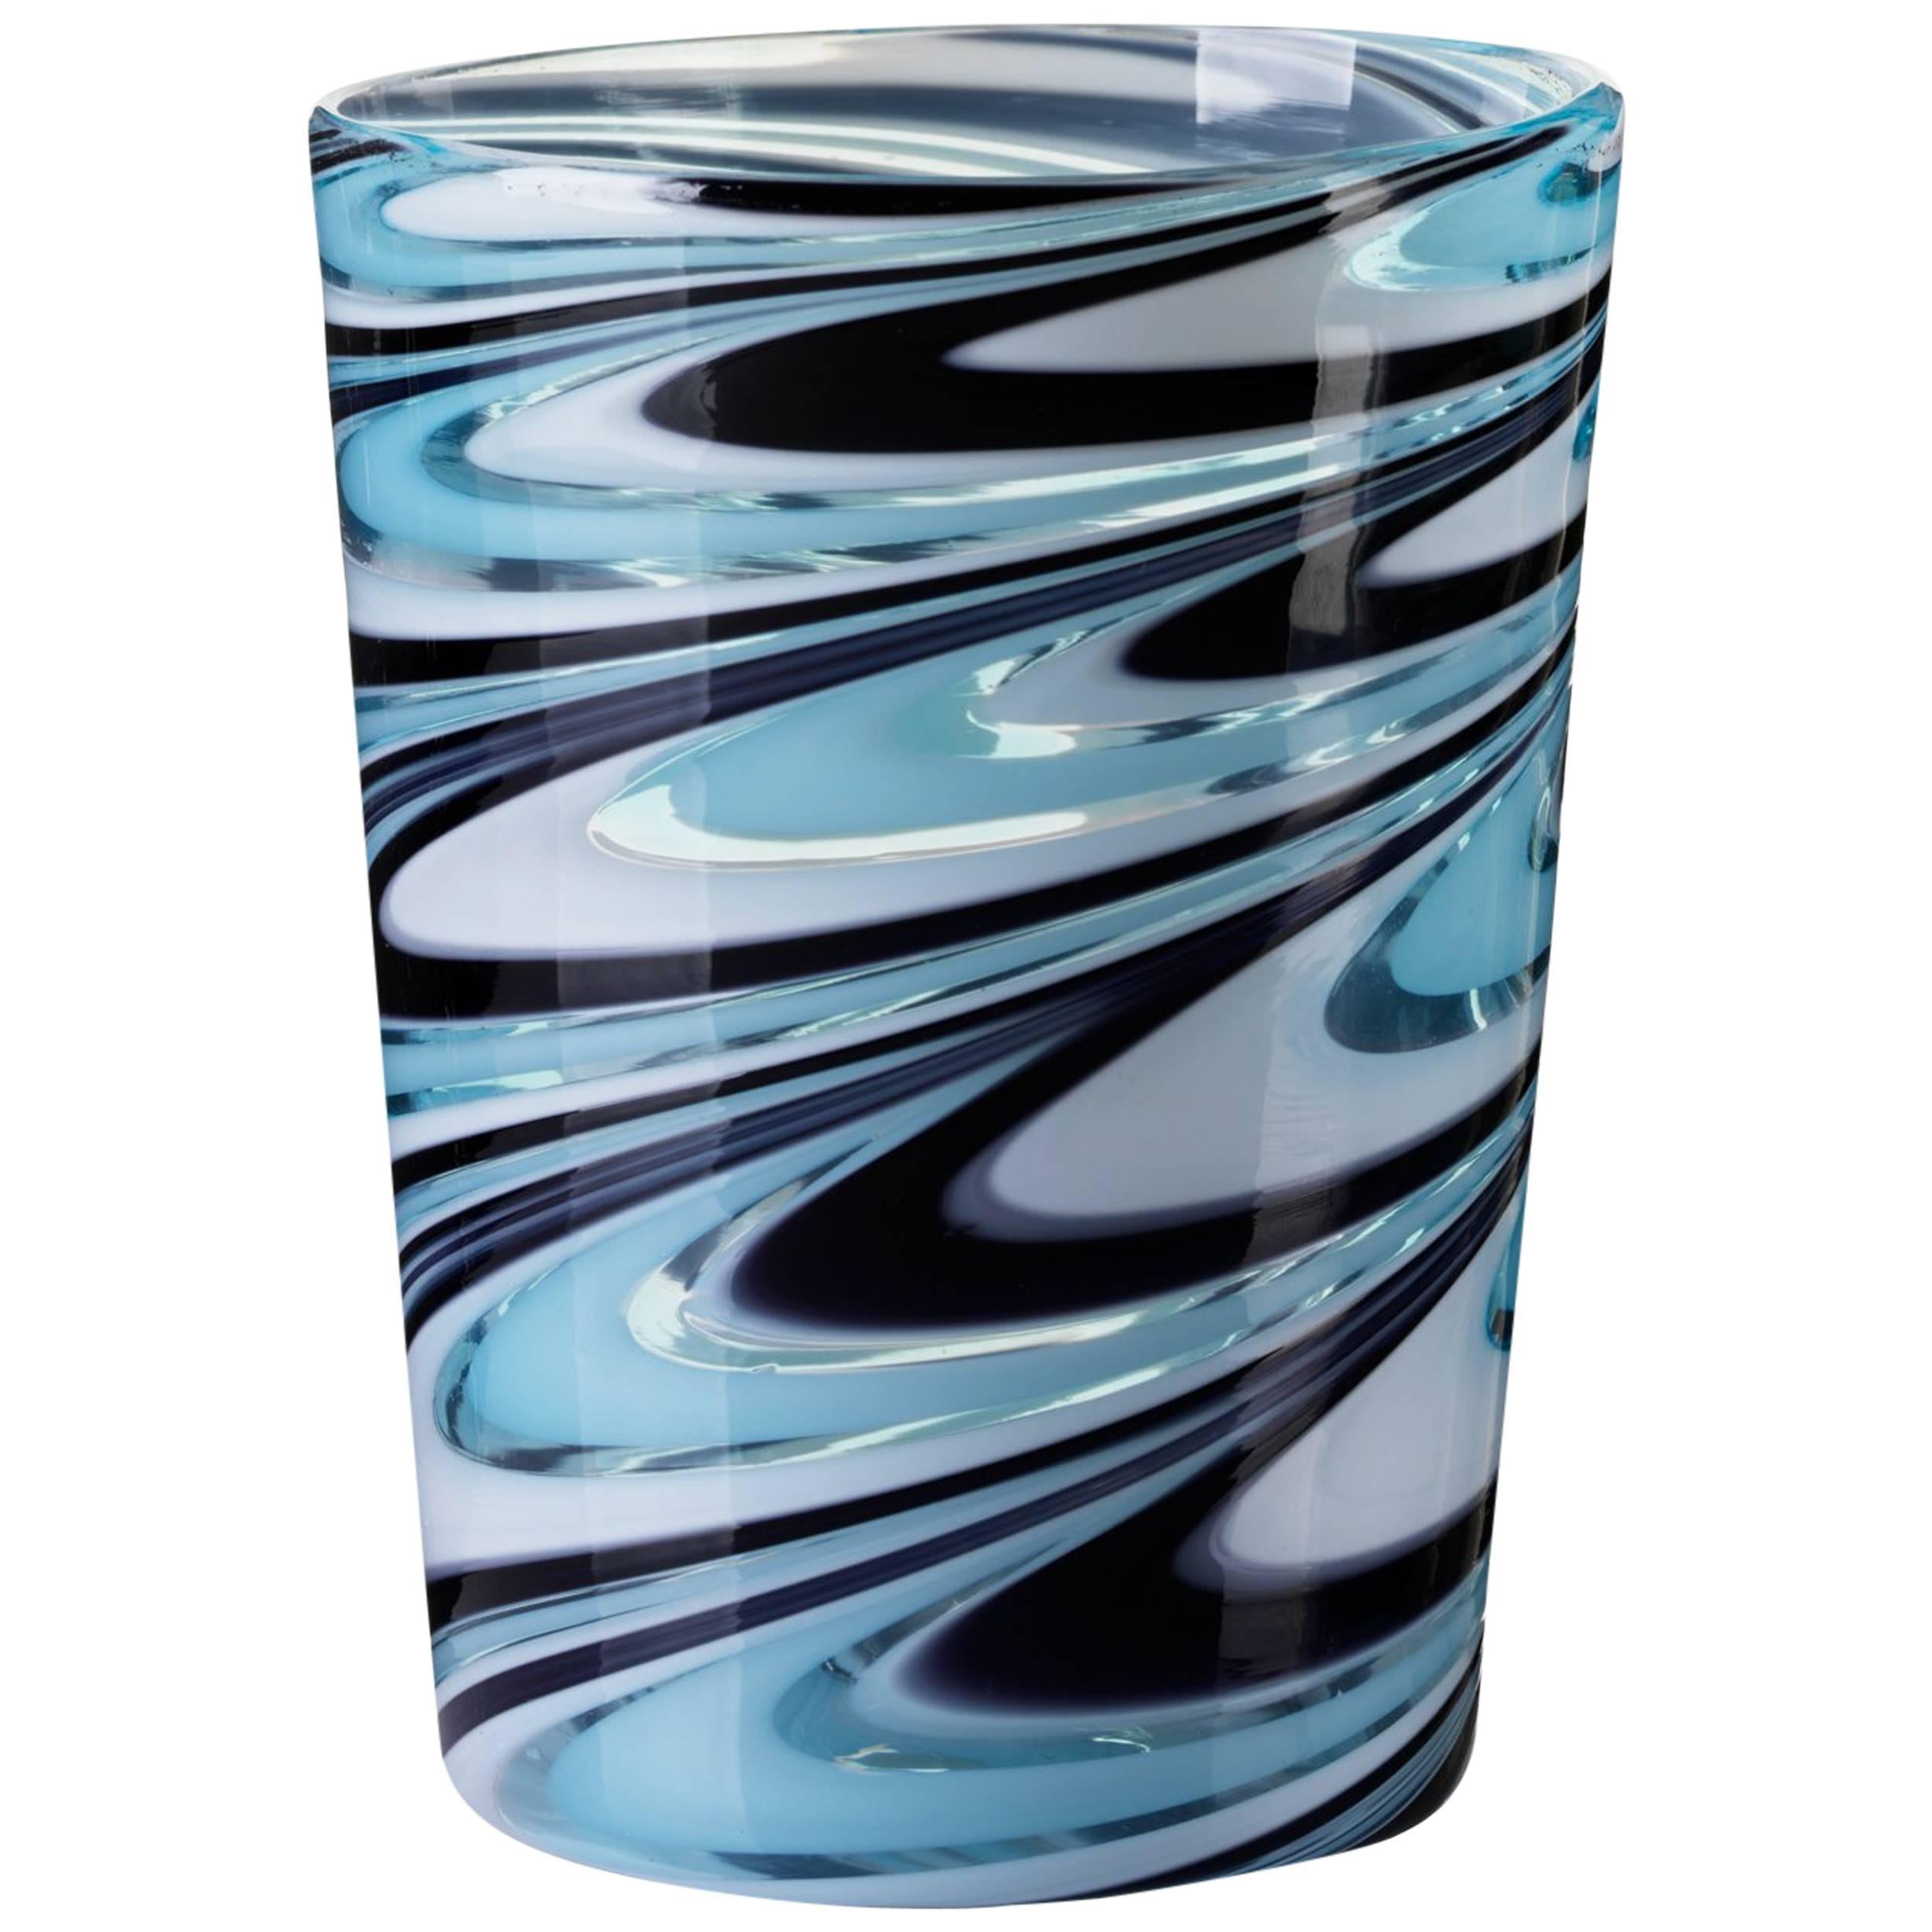 Fenice tumbler, set of two

This tumbler is handcrafted in Venice by Laguna B exclusively for Cabana. 
They are all hand blown in Murano, Venice. Each item corresponds to two glasses. You can order as many items as desired.